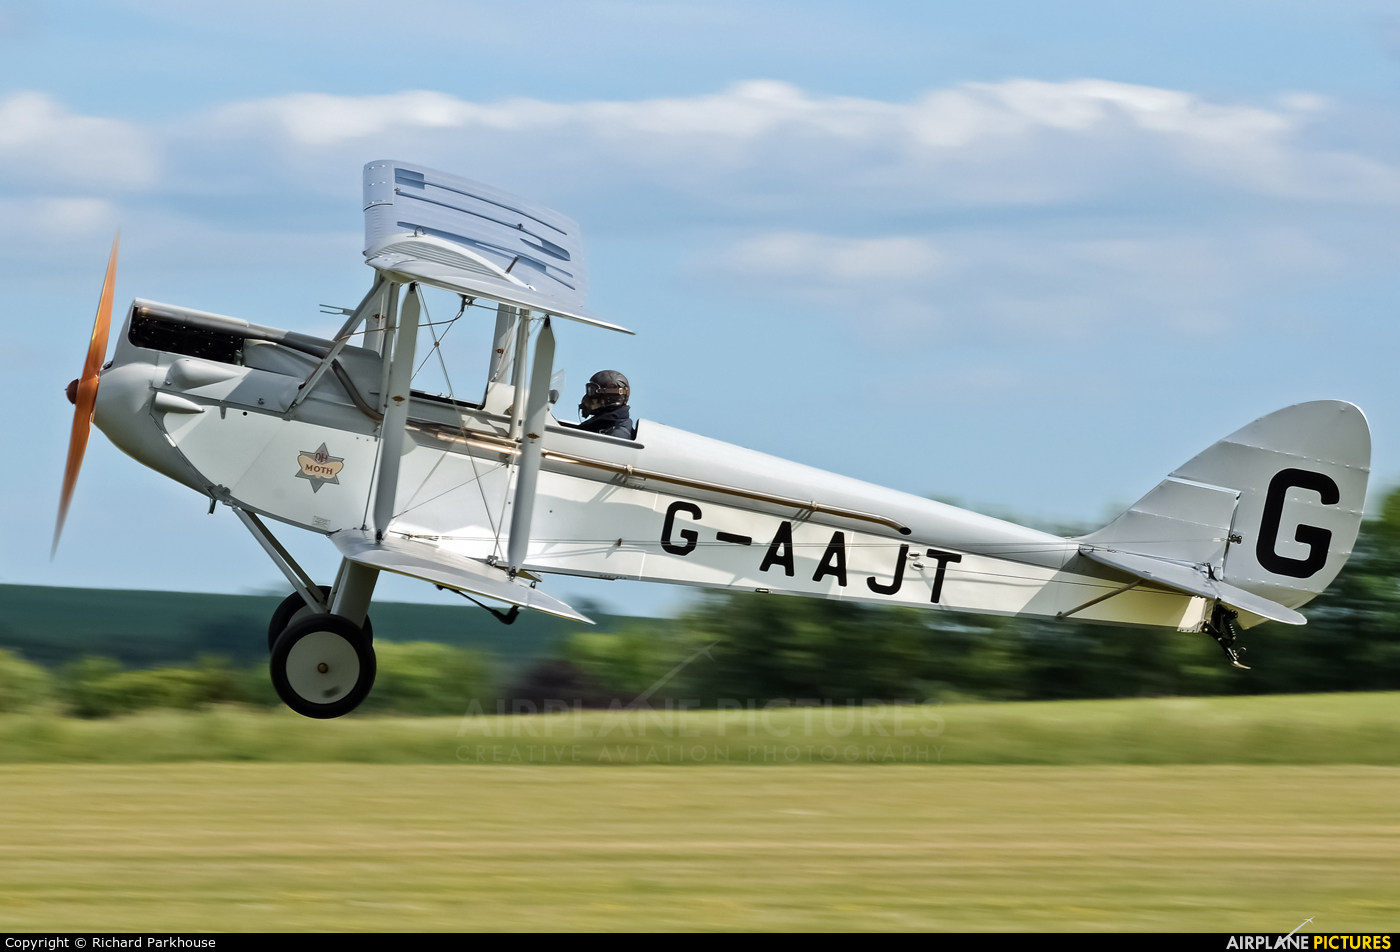 Private G-AAJT aircraft at Old Sarum